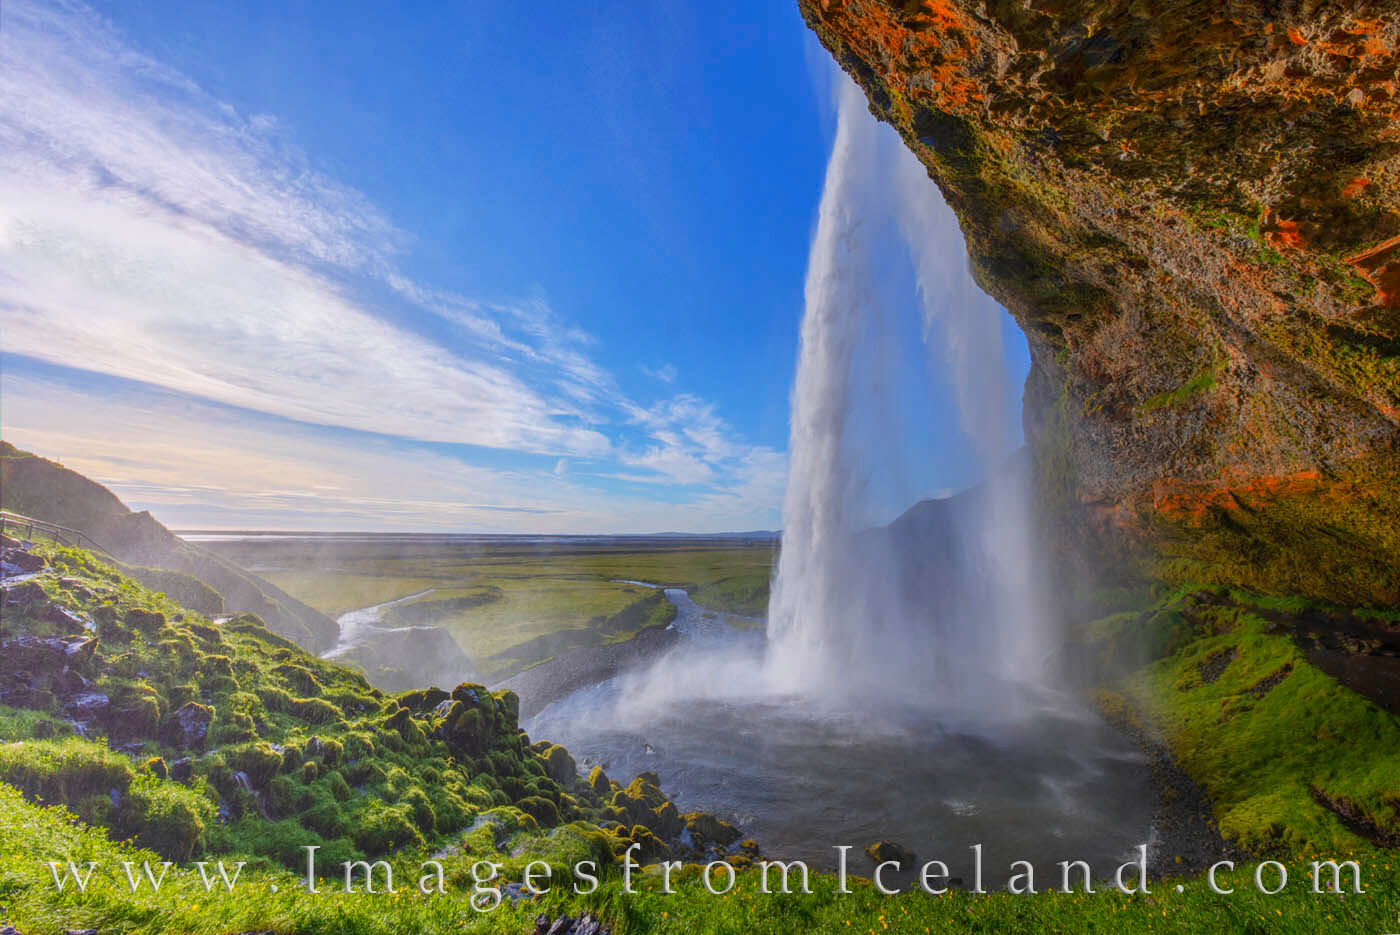 In the late afternoon in south Iceland, Seljalandsfoss flows over the rock walls on its way to the Atlantic Ocean. As one of...